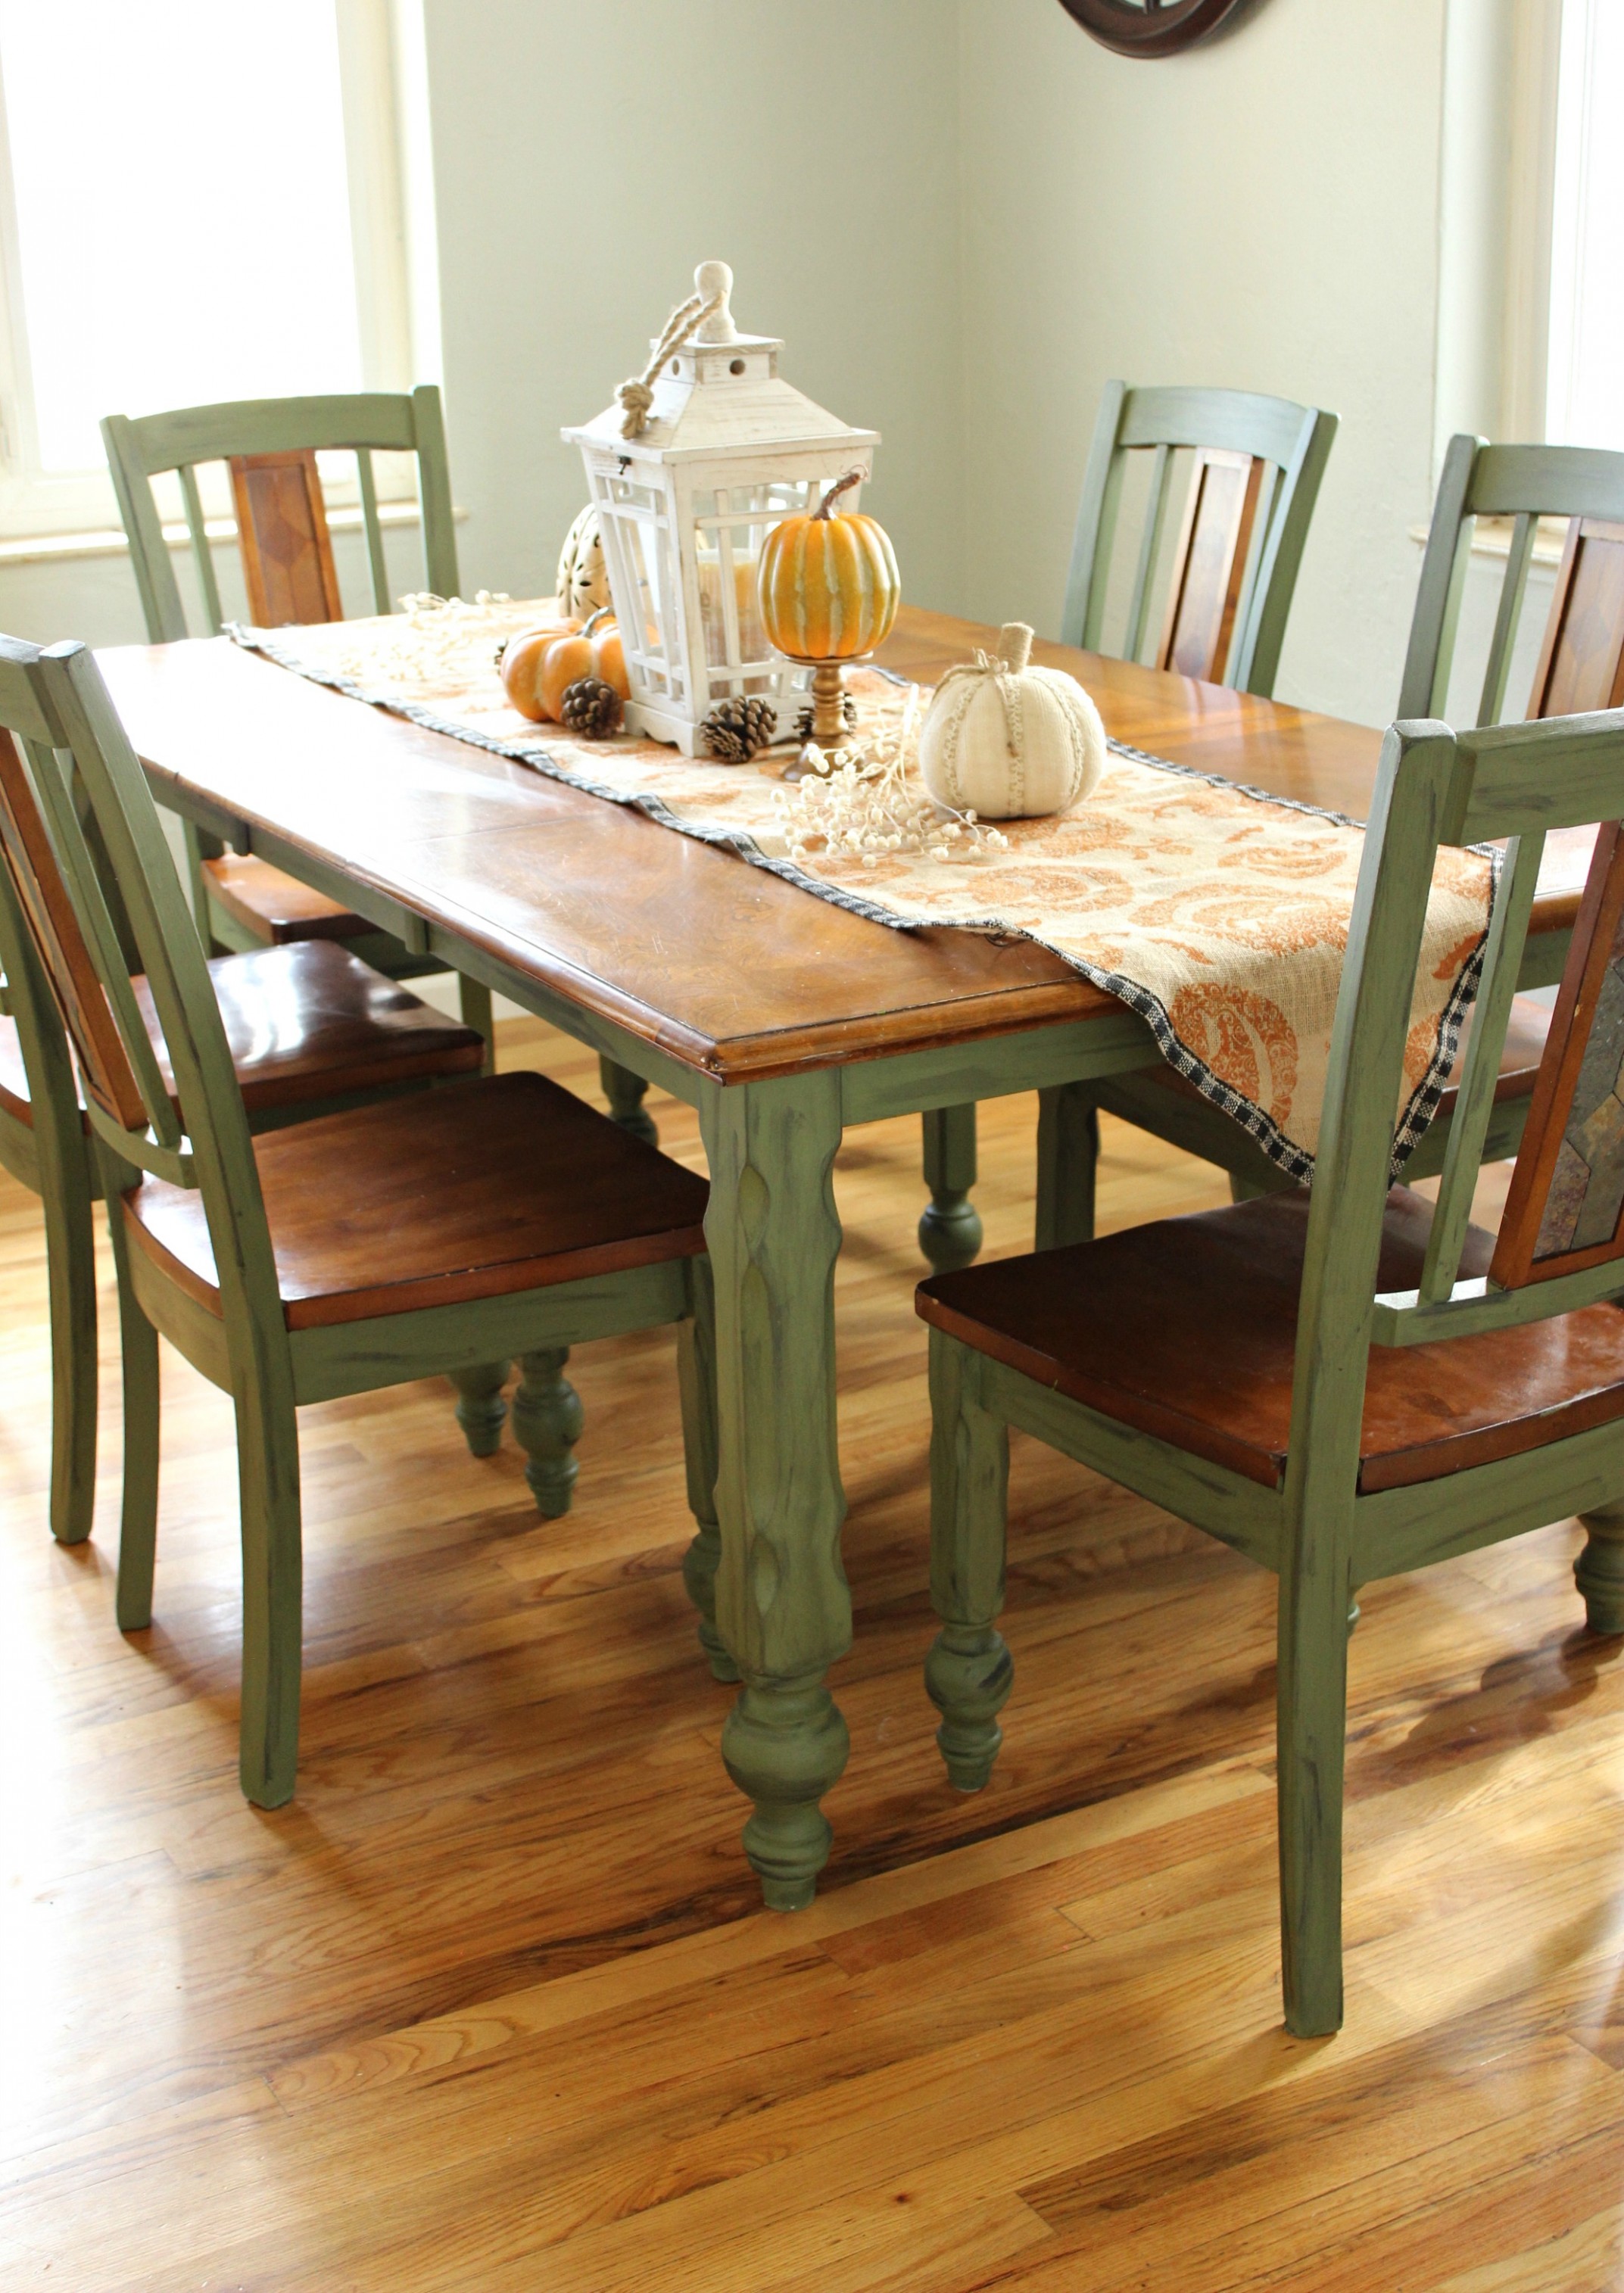 How To Update A Table With Chalk Paint I Dig Pinterest Chalk Paint Around Me